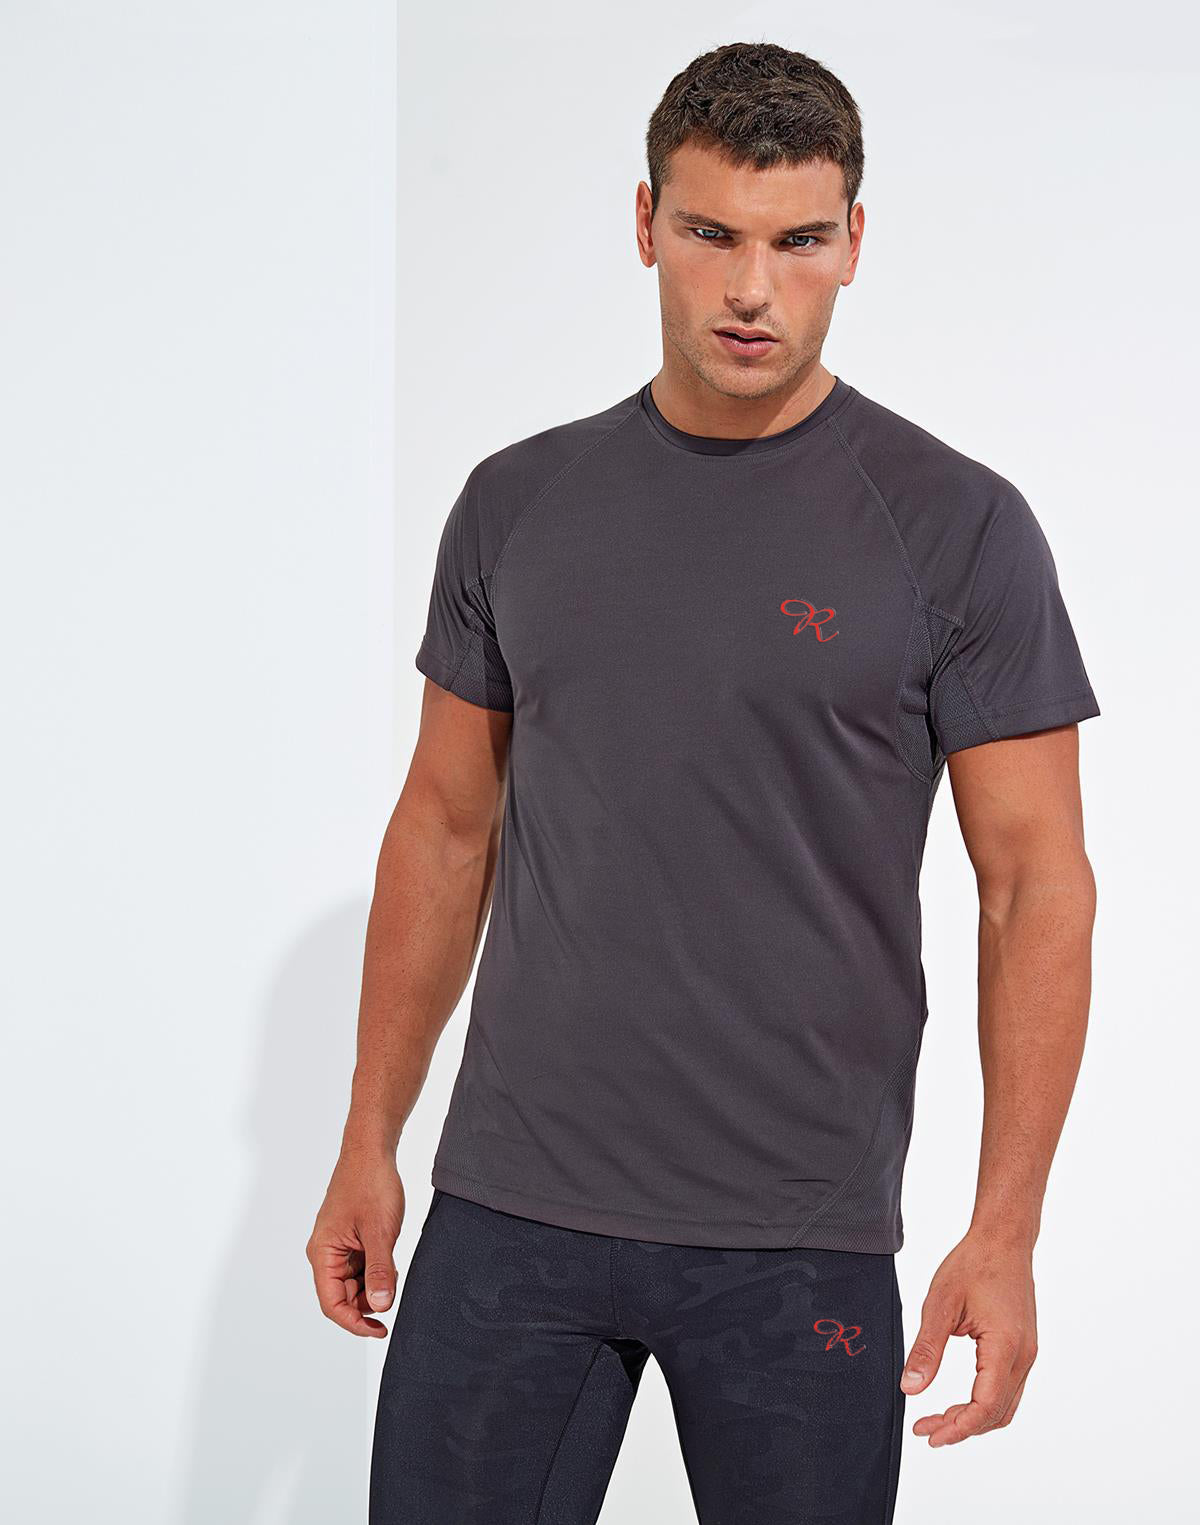 Elevate your performance with Rival's Panelled tech T-Shirt. Made with wicking fabric technology and strategically placed mesh panels, this tee provides superior ventilation and comfort, keeping you cool and dry during intense training and games. Reach new levels of success with this must-have athletic essential